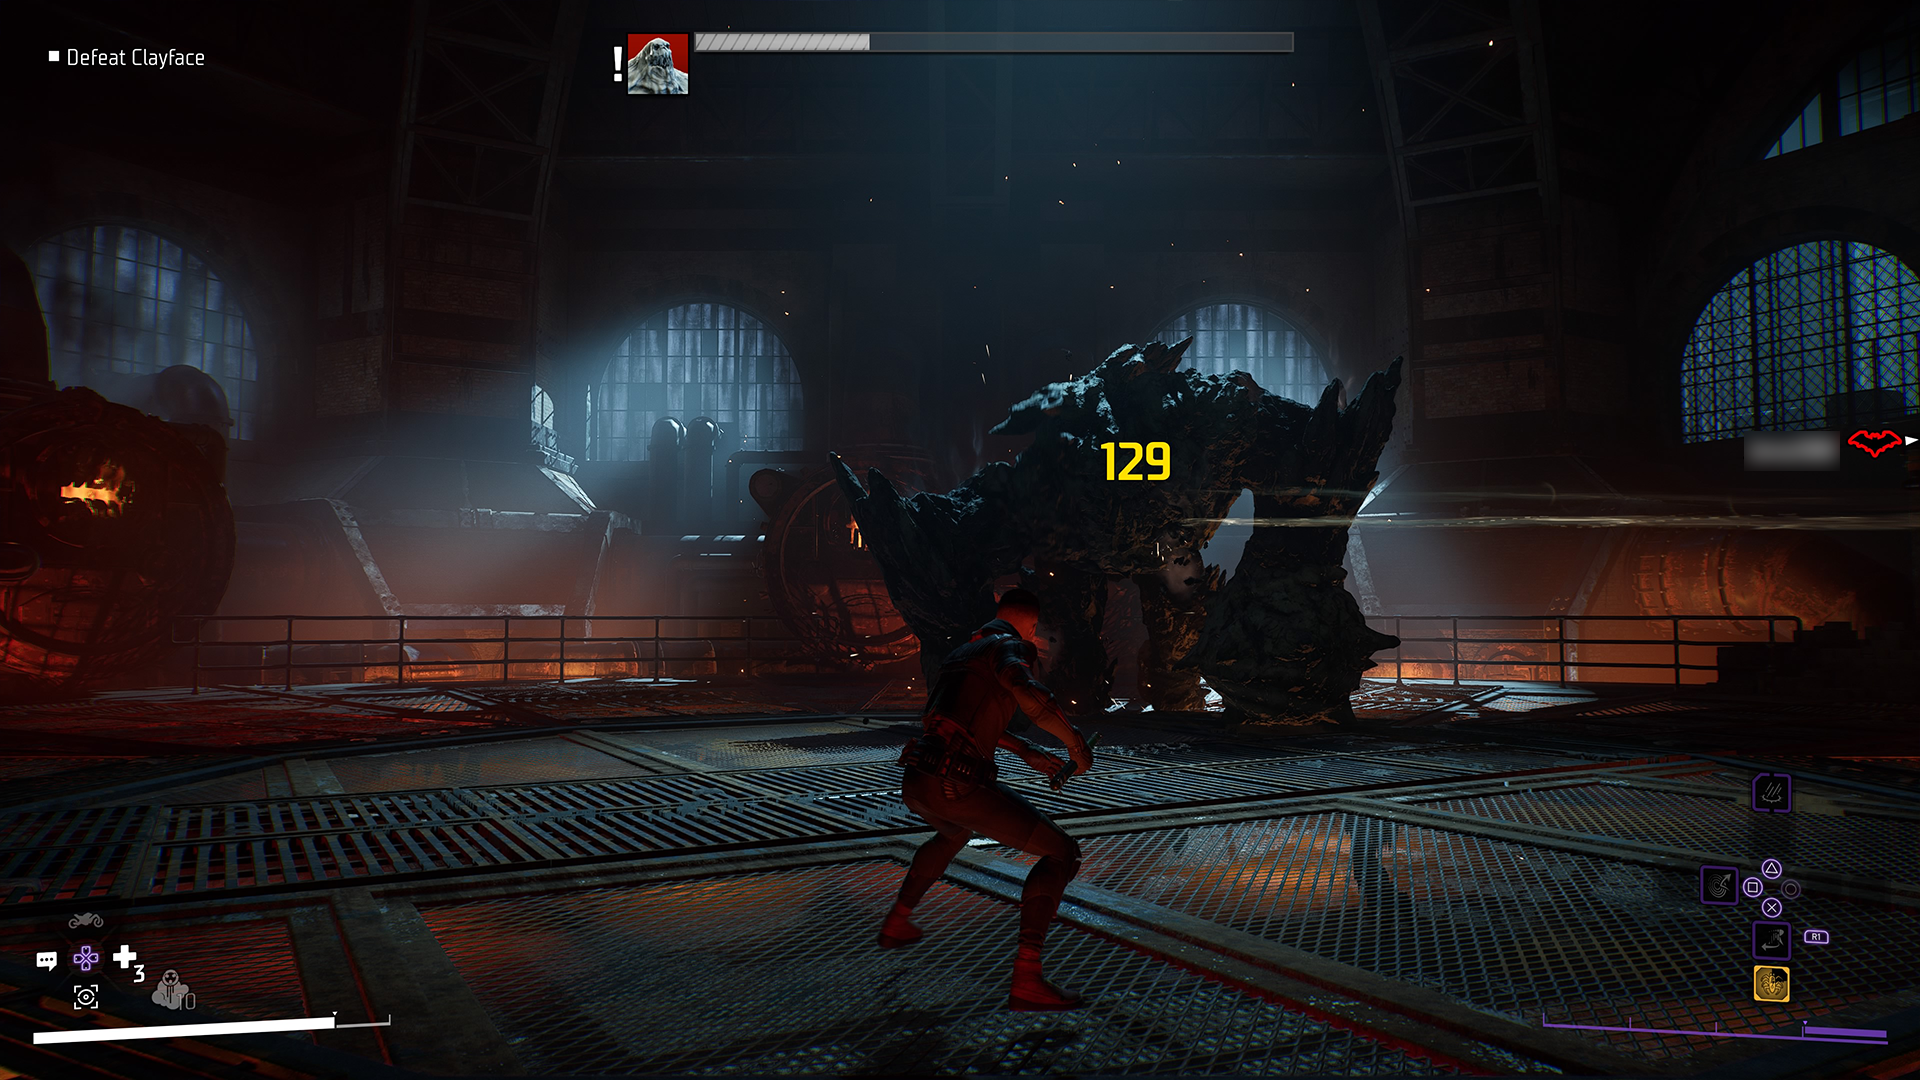 Gotham Knights Multiplayer: Co-Op Mode, Split Screen, and